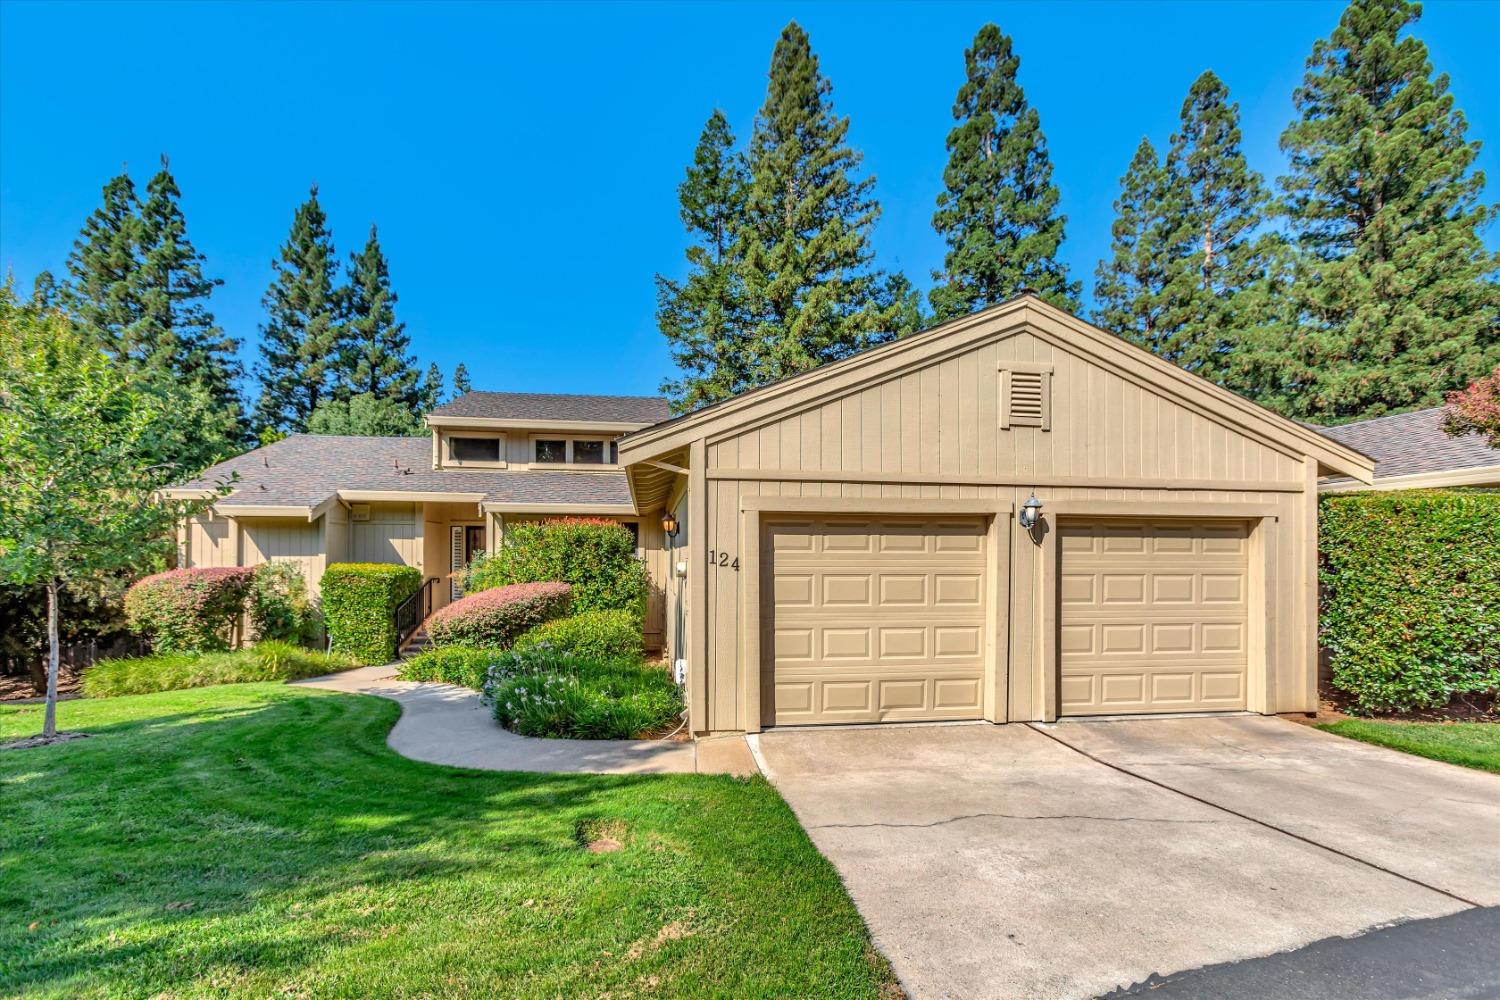 Step into this charming SINGLE-STORY gem nestled in the sought-after Canyon Ridge community, where y